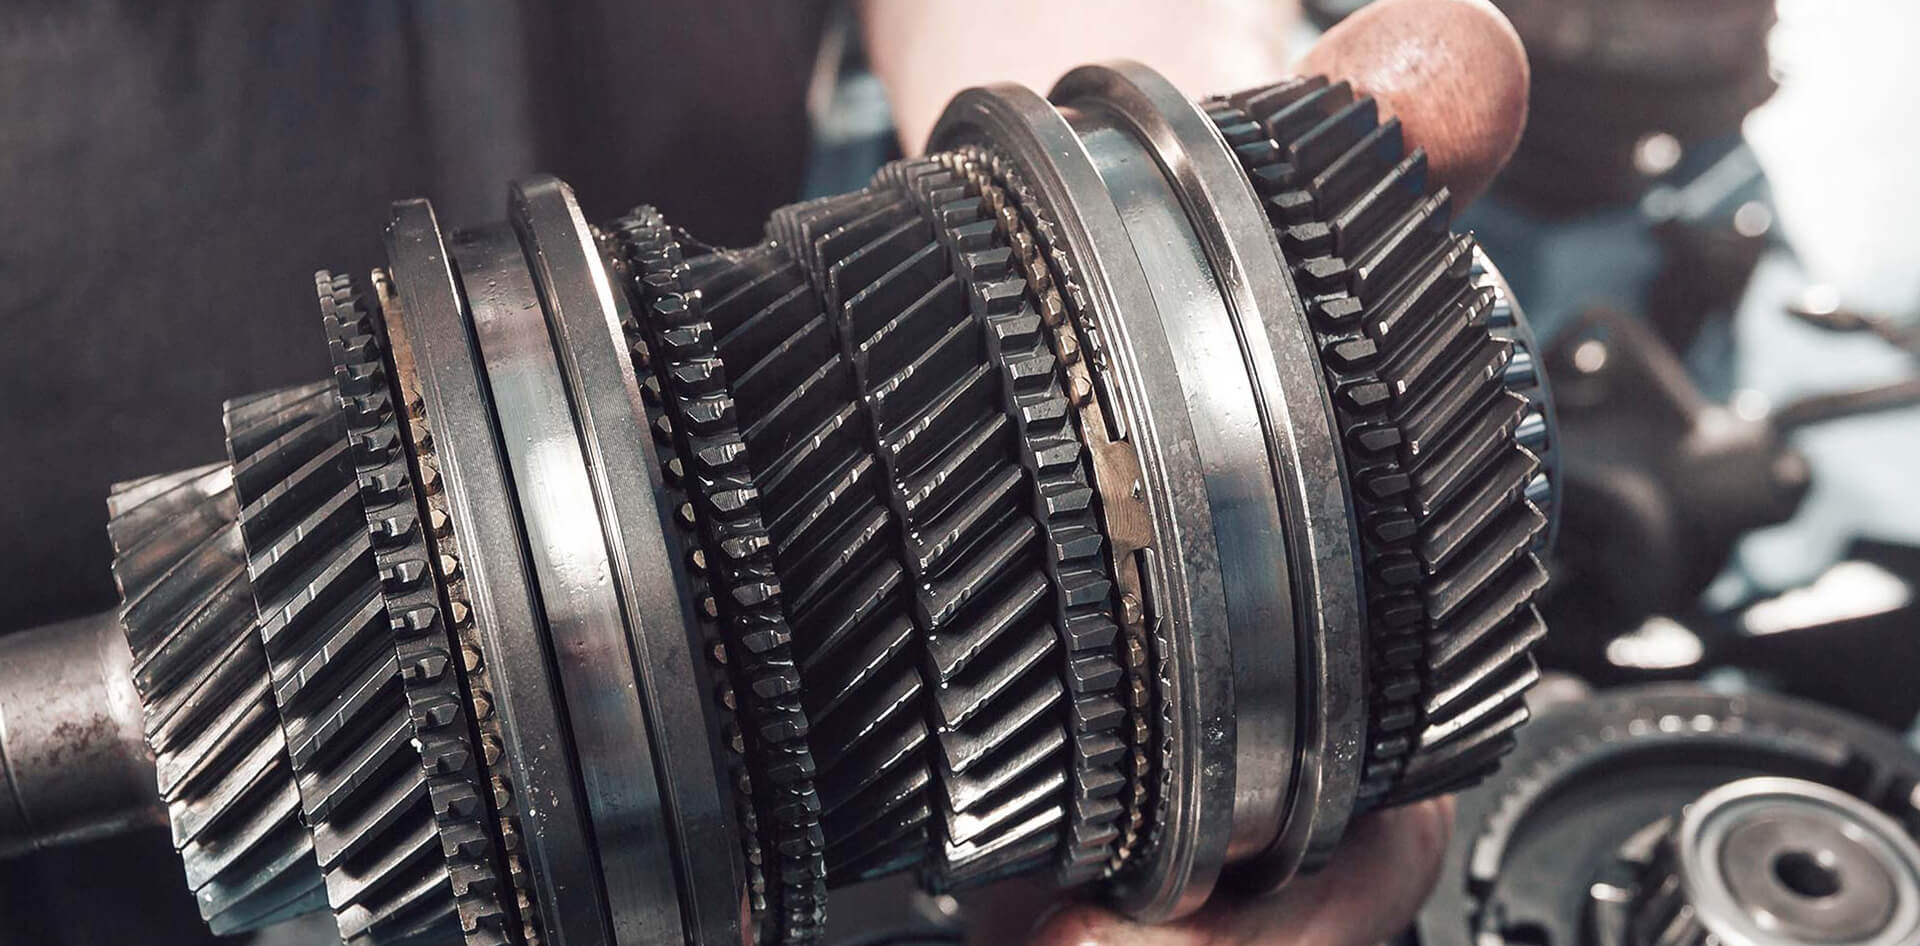 Professional photography of a close up of a car gear